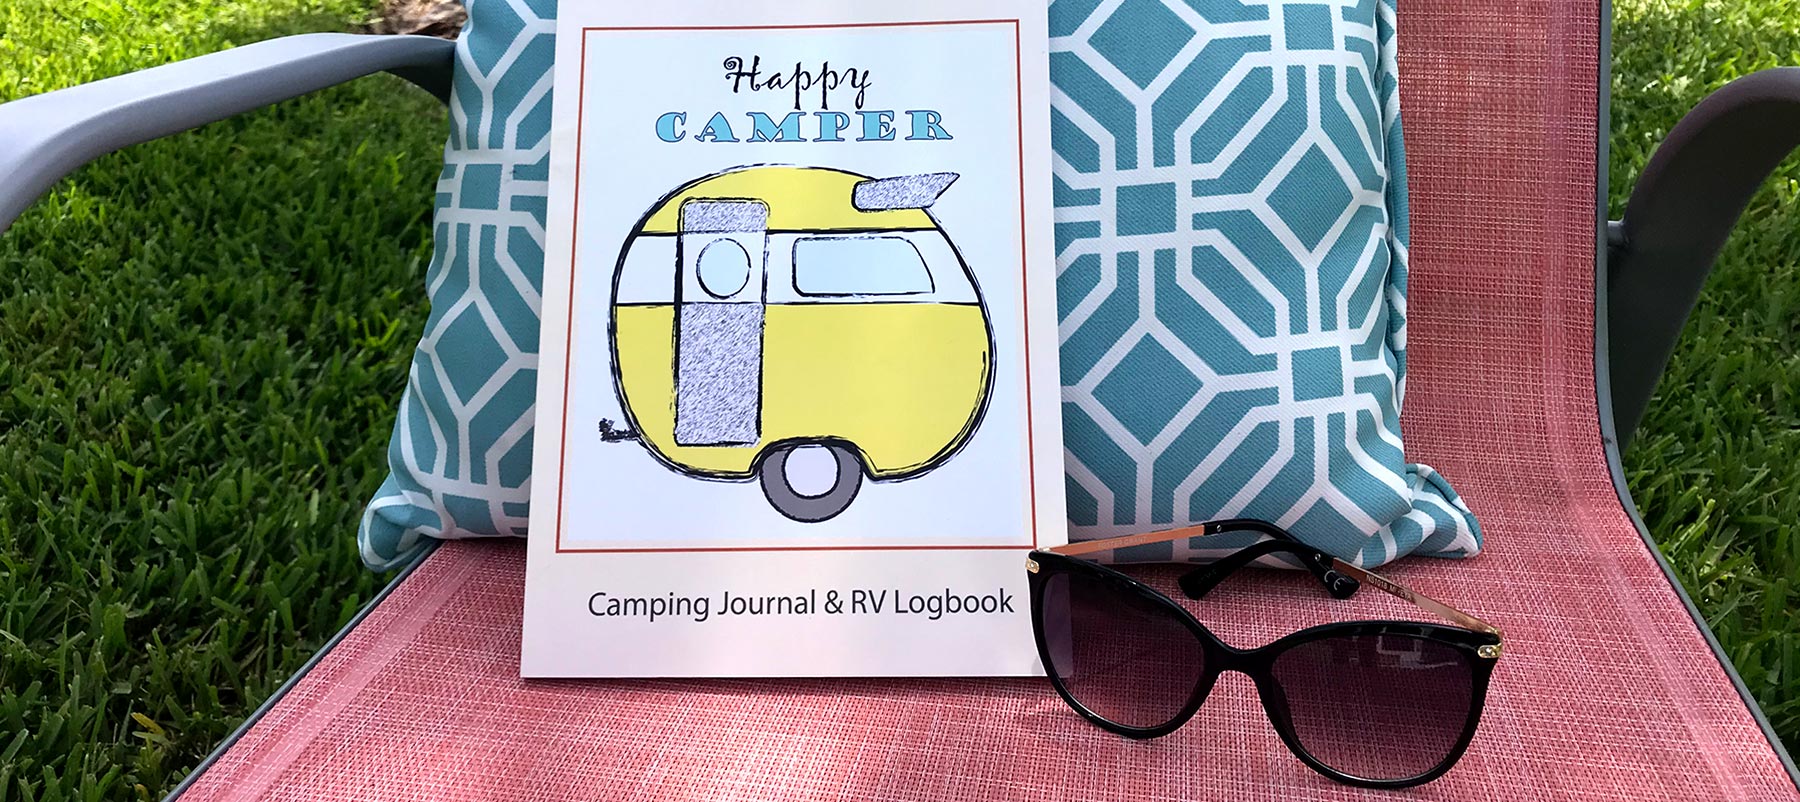 Happy Camper Camping Journal